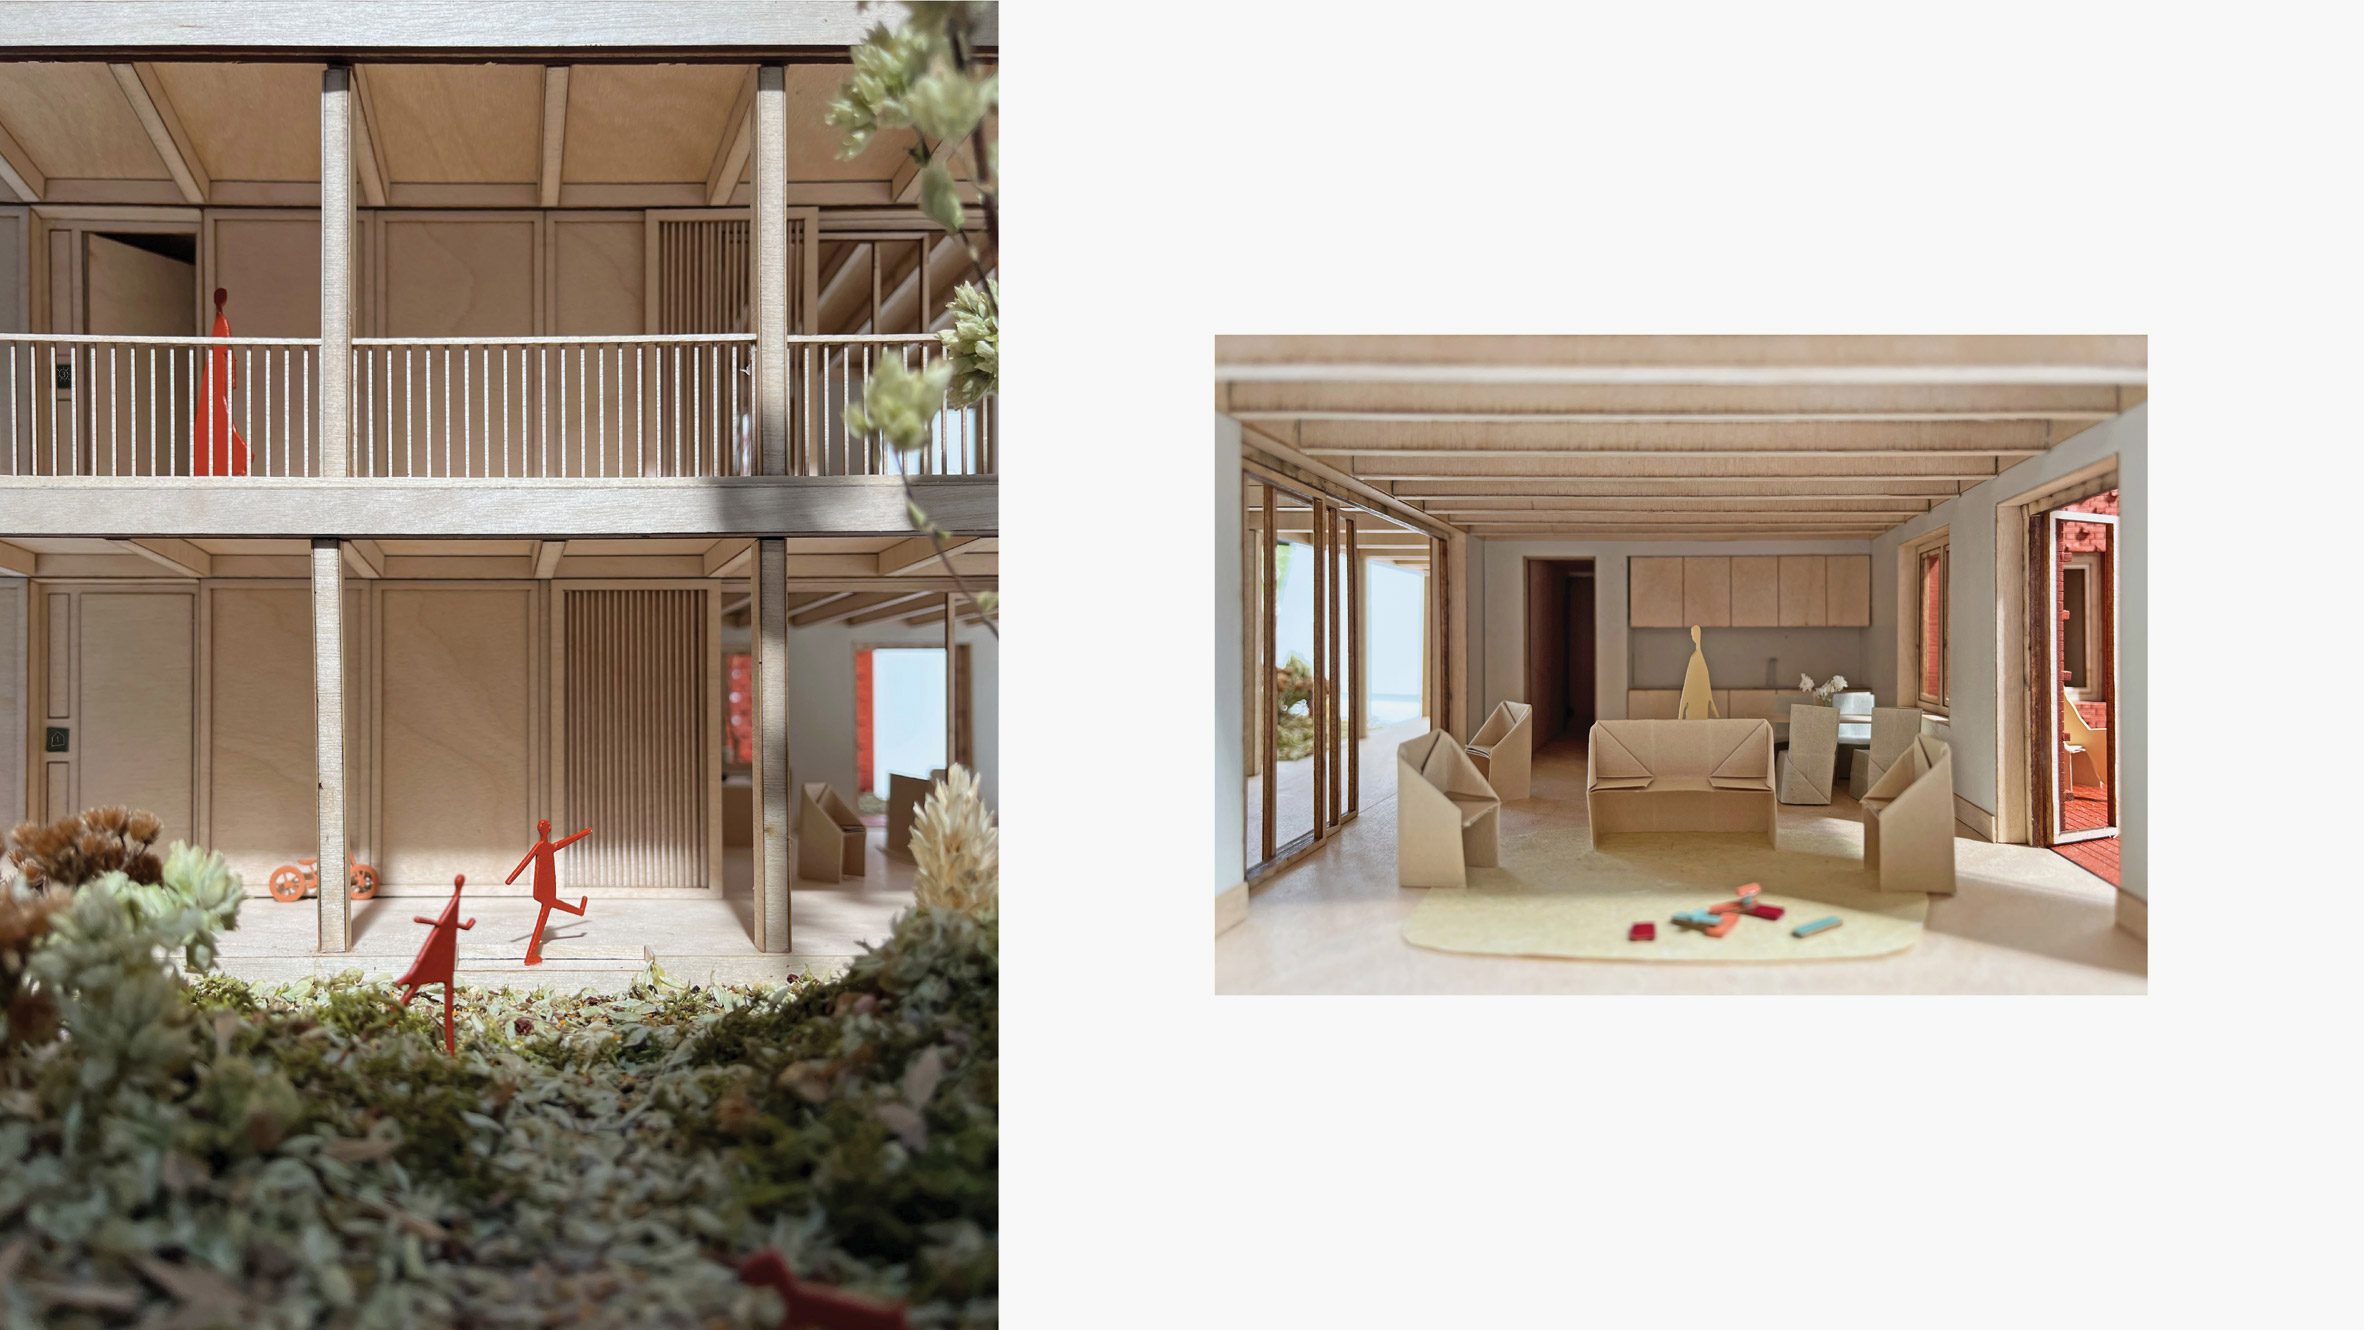 photos of models of a living room and a courtyard